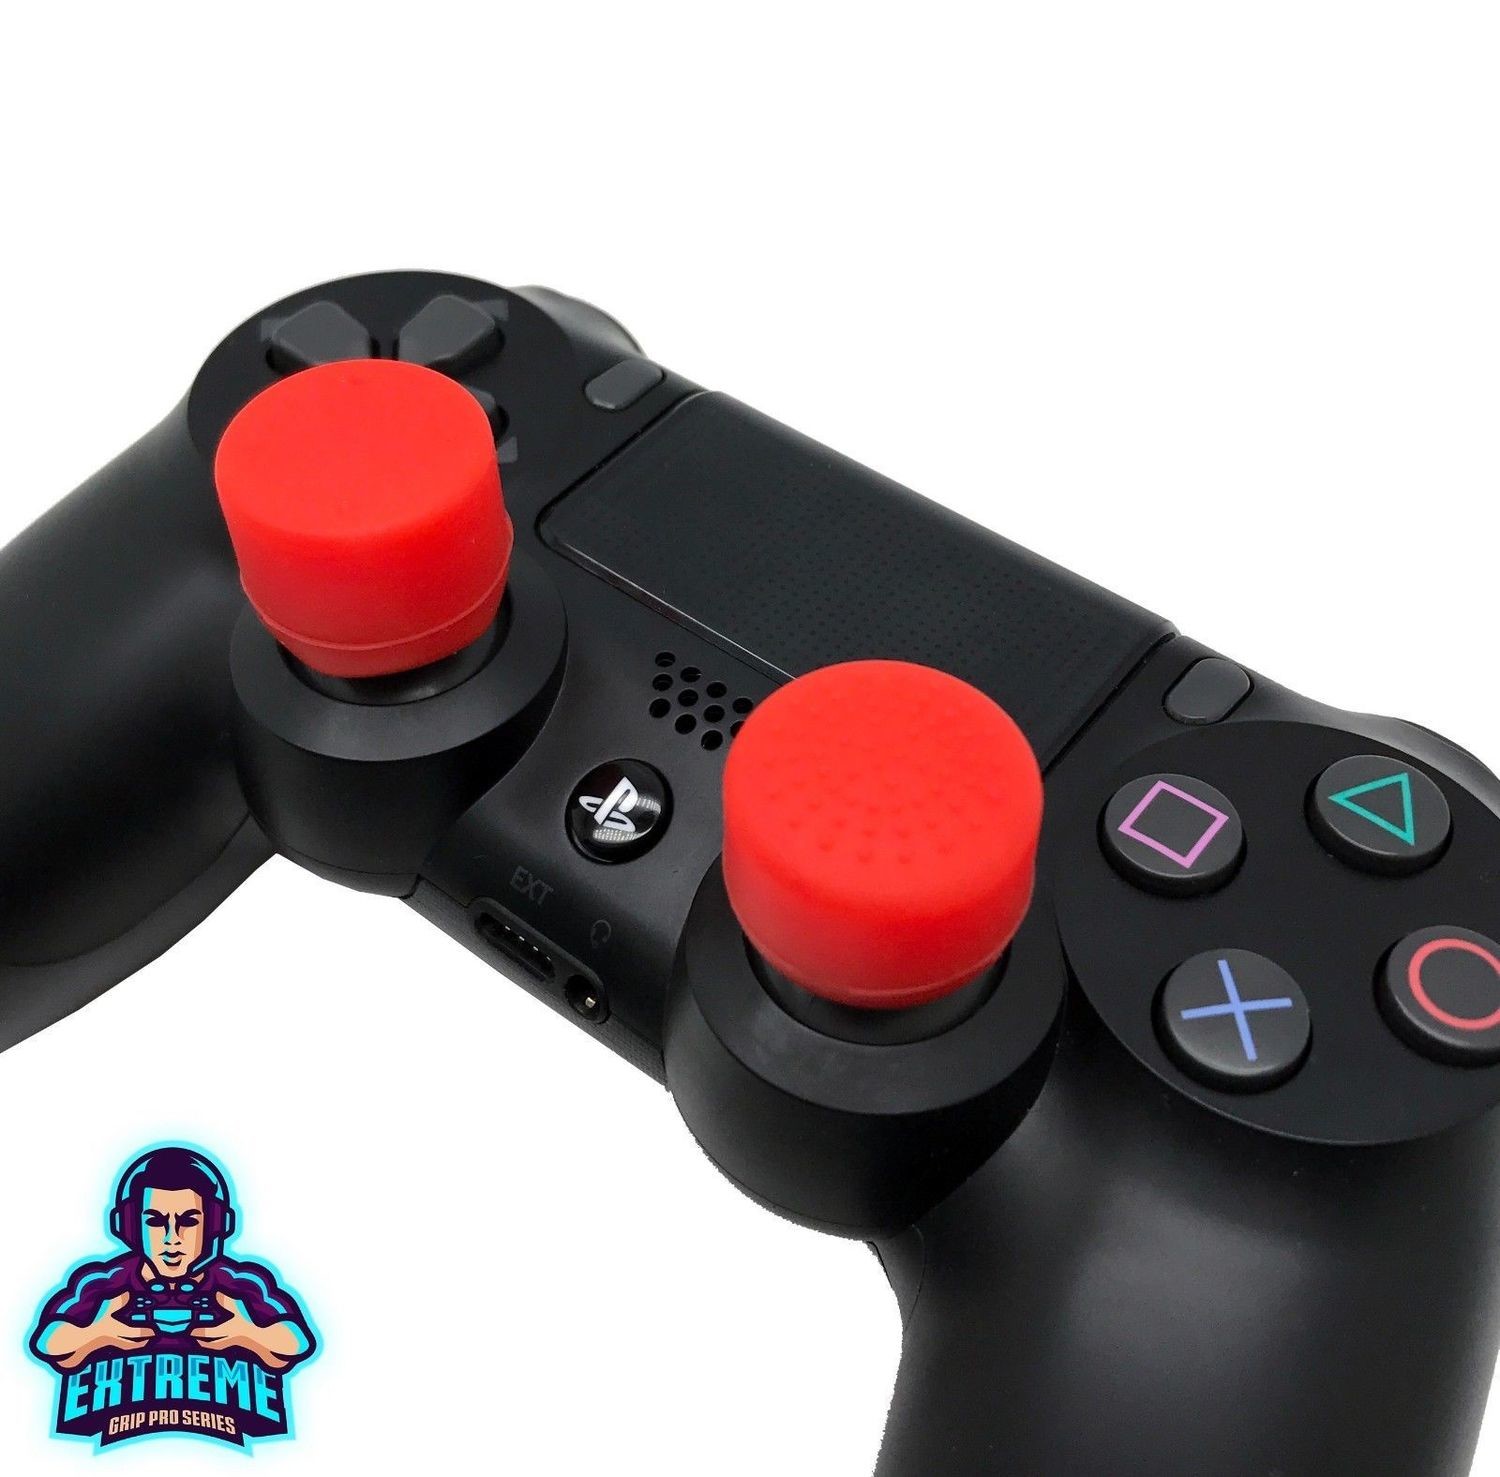 RED] Extreme Analog Thumb Stick Cover Grip Caps Extenders for PS4 Controller